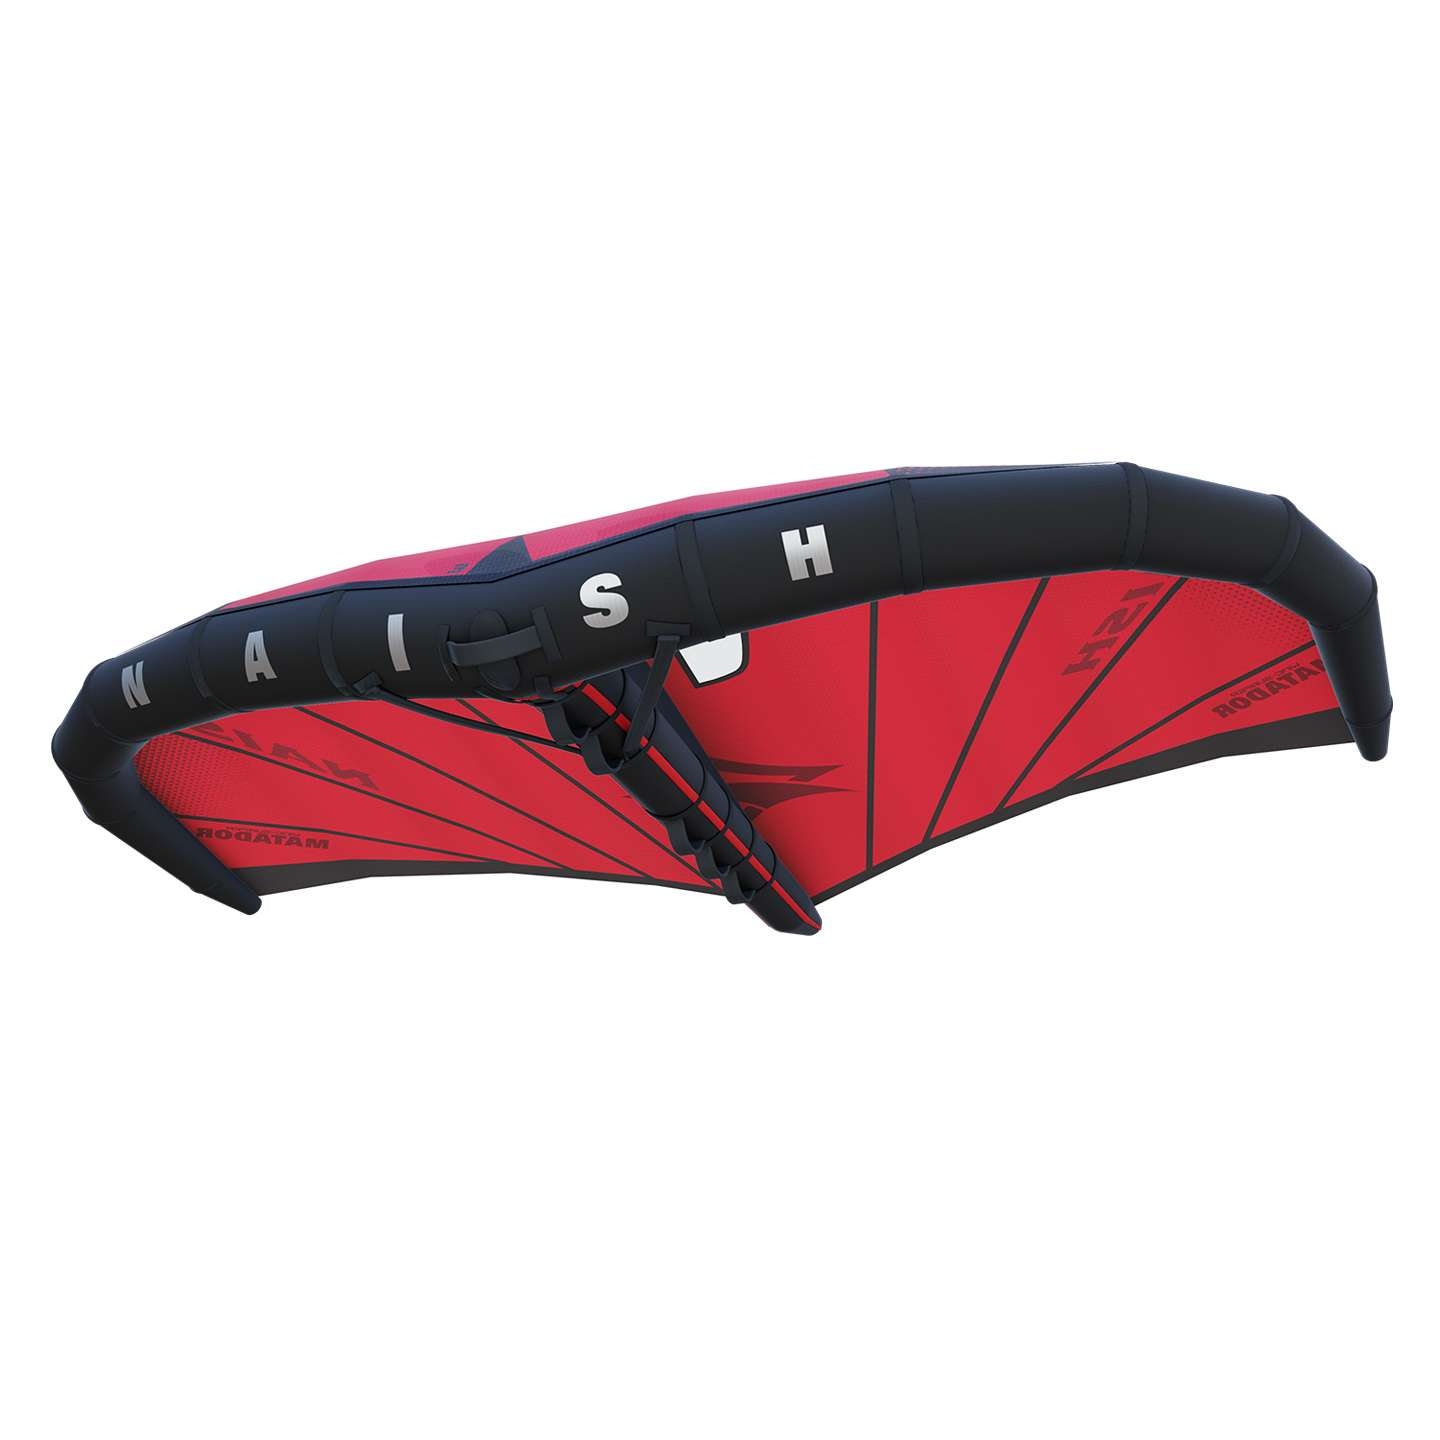 Naish S26 Wing Surfer Matador – 3 Metre – Red – The Foiling Collective